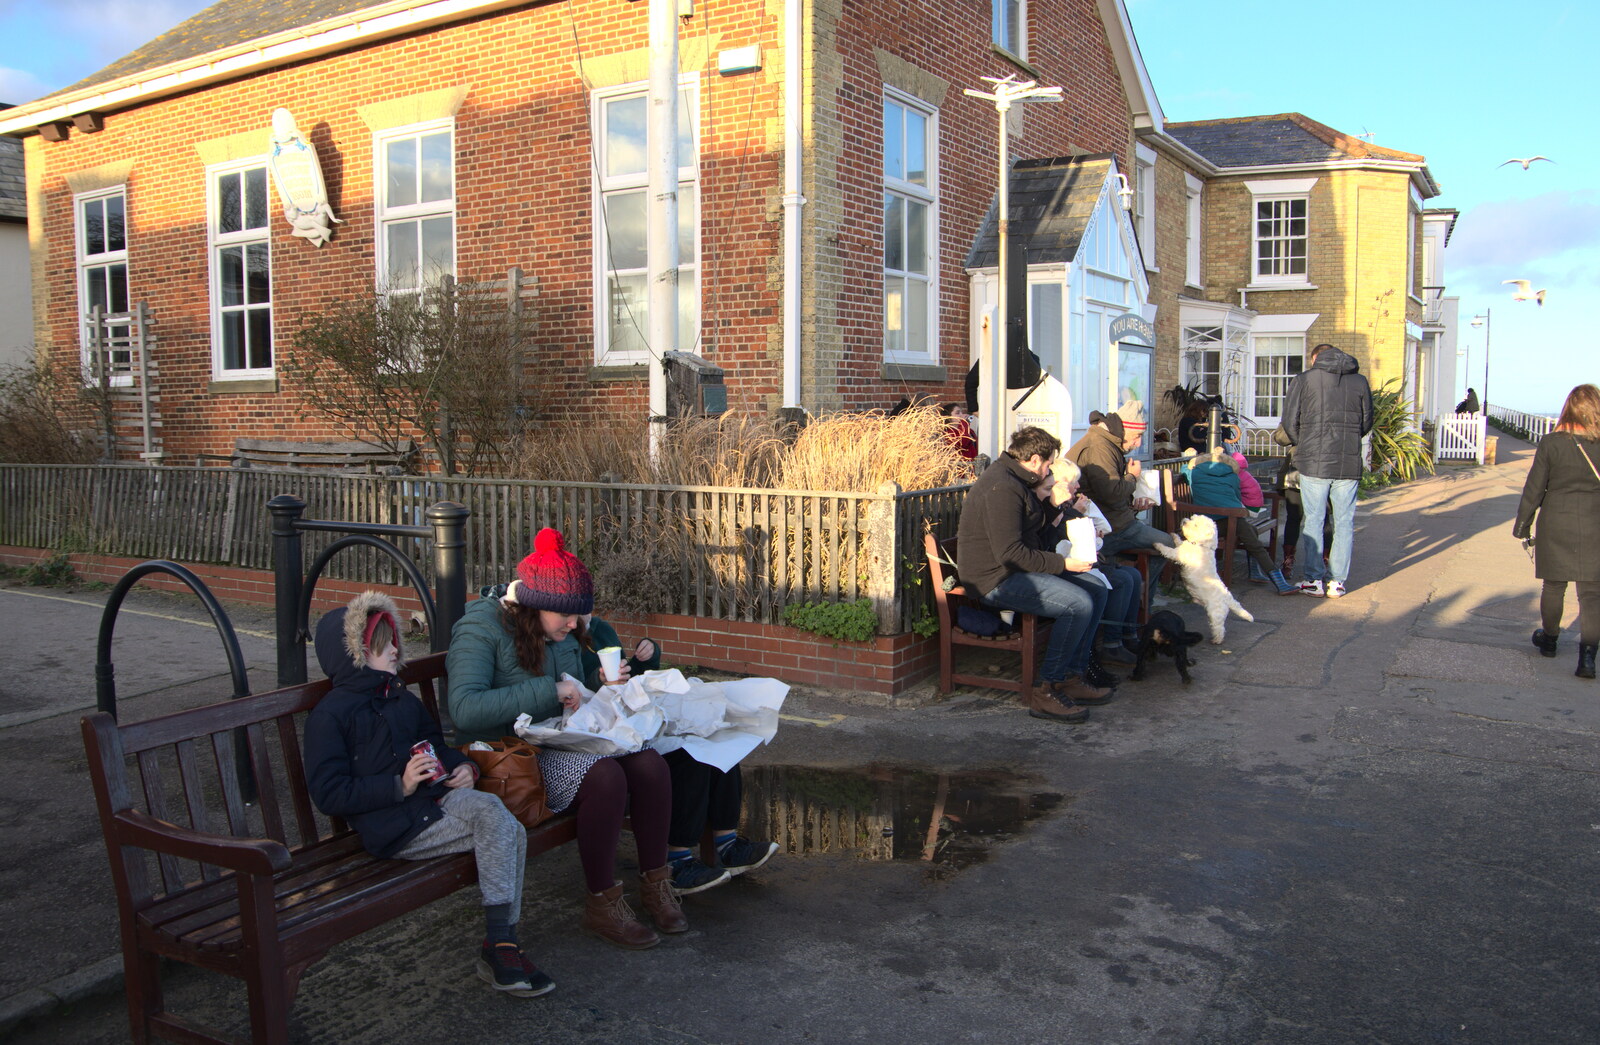 We eat our grub outside the Sailor's Reading Room from A Return to the Beach, Southwold, Suffolk - 20th December 2020